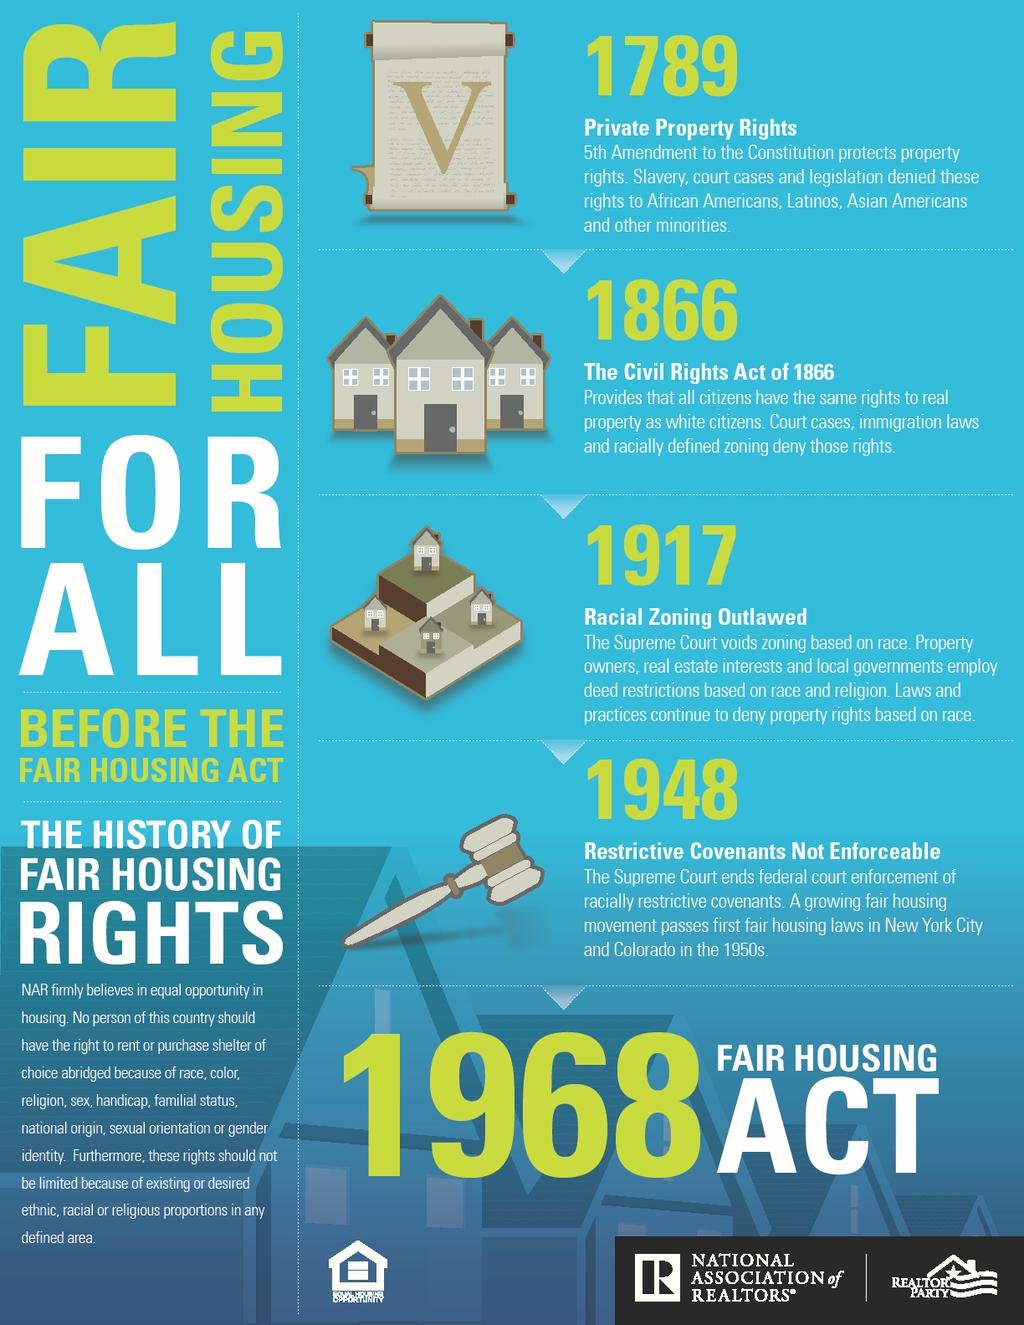 APRIL IS FAIR HOUSING MONTH April 2018 marks the 50th anniversary of the 1968 landmark Fair Housing Act.